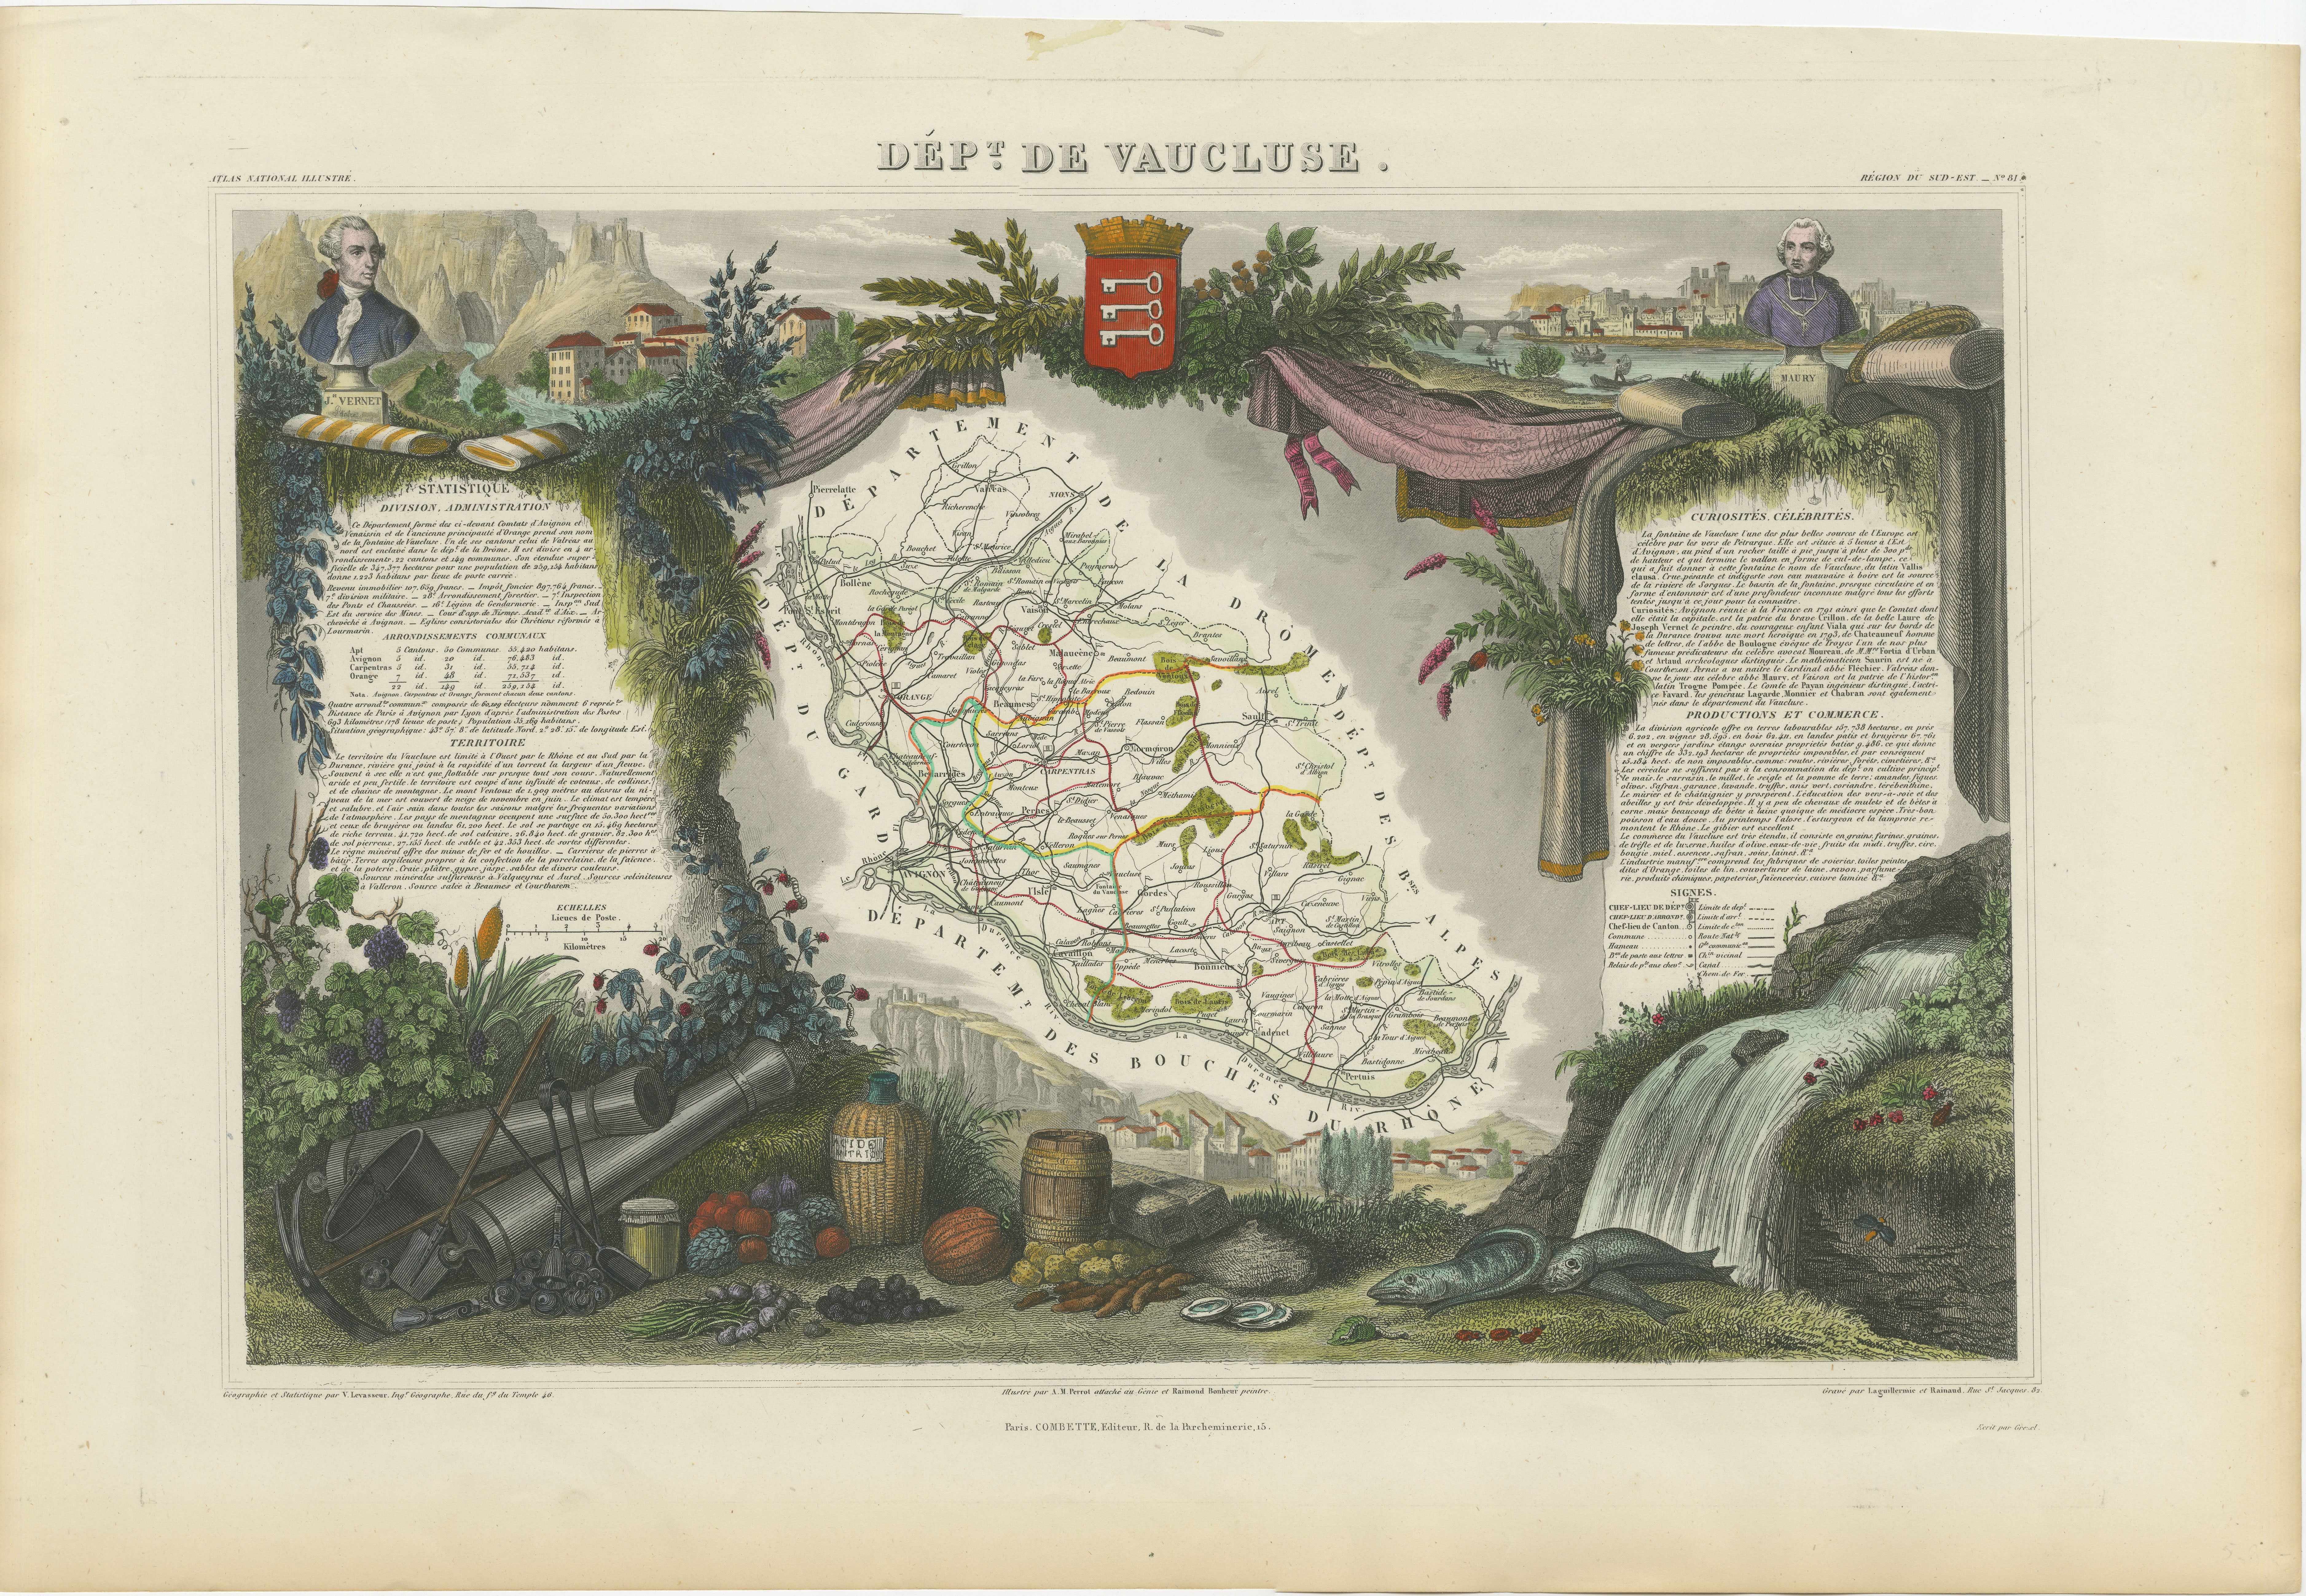 This original hand-colored map is from the 